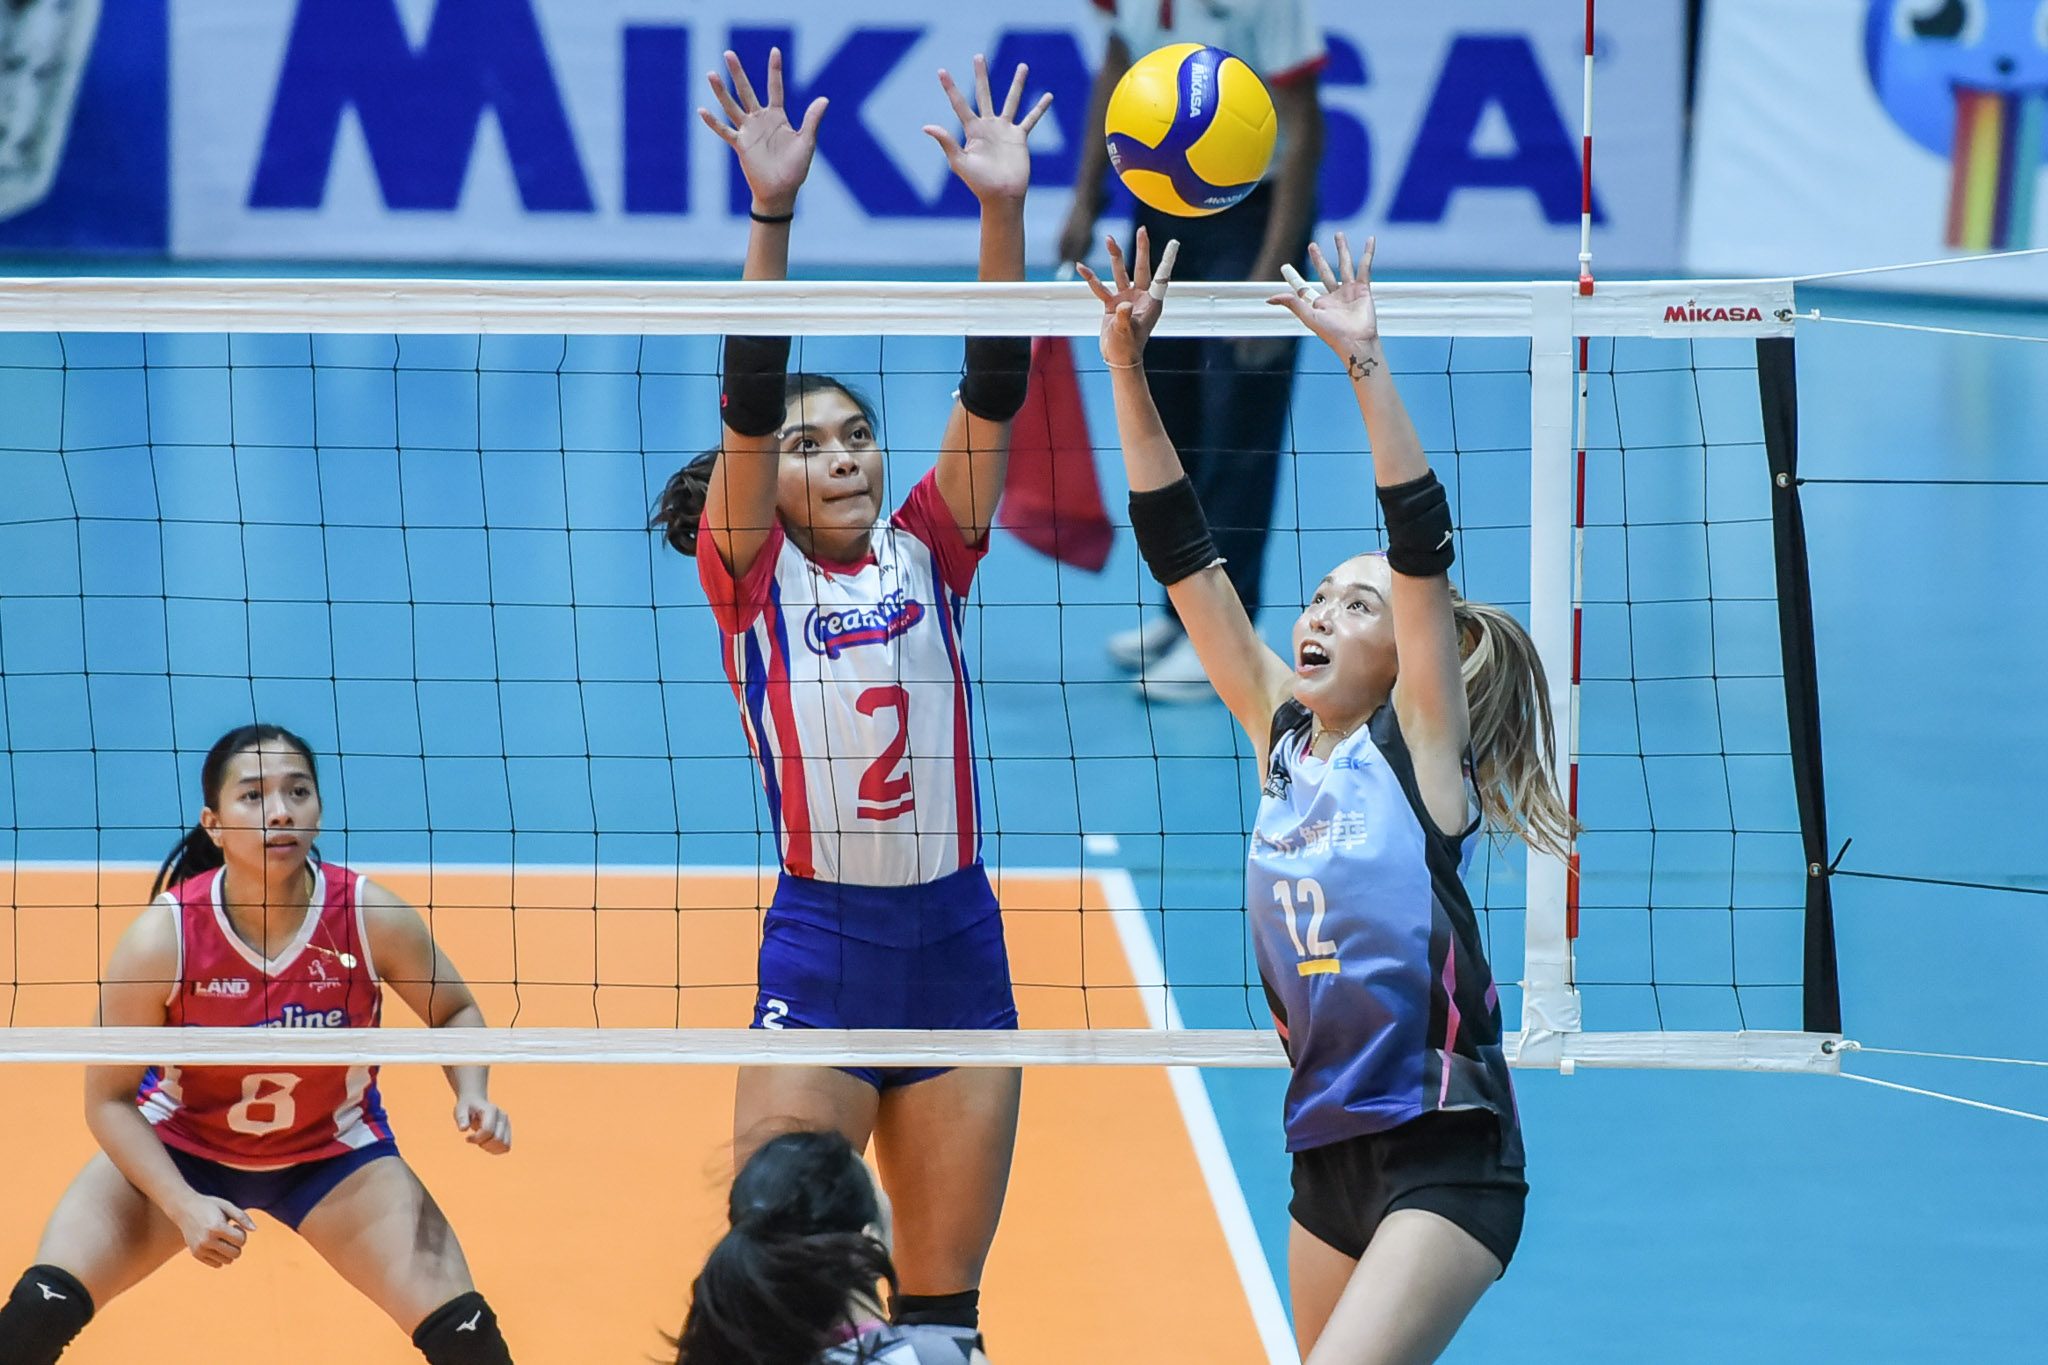 KingWhale clinches PVL final as Creamline loses Galanza, Valdez to injury